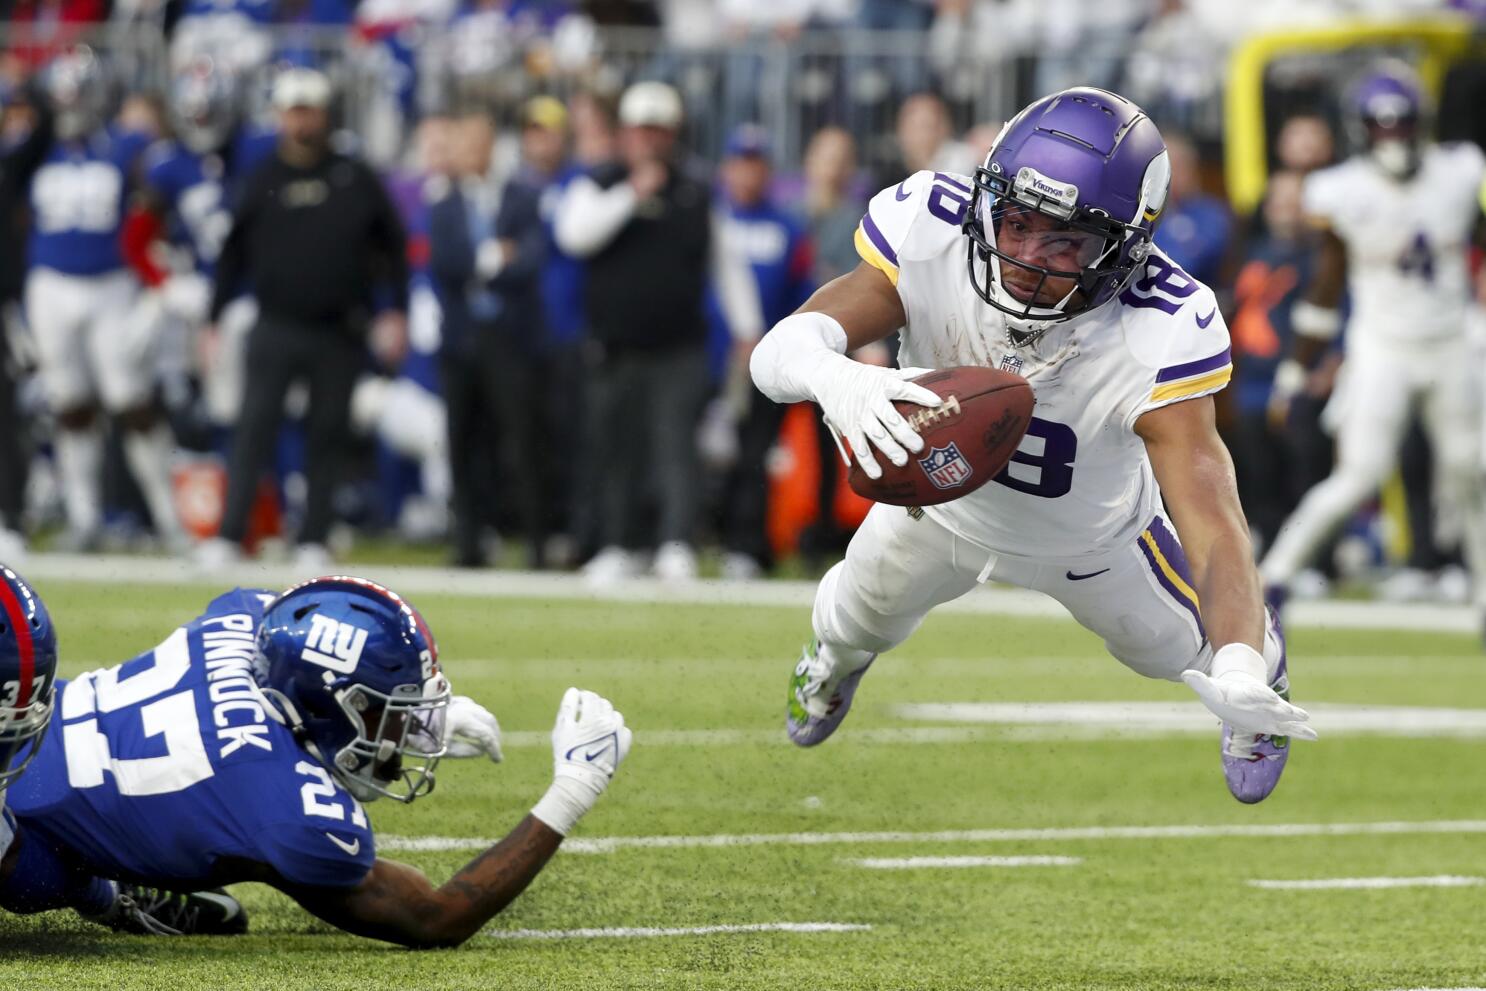 Giants already looking ahead to playoff rematch with Vikings